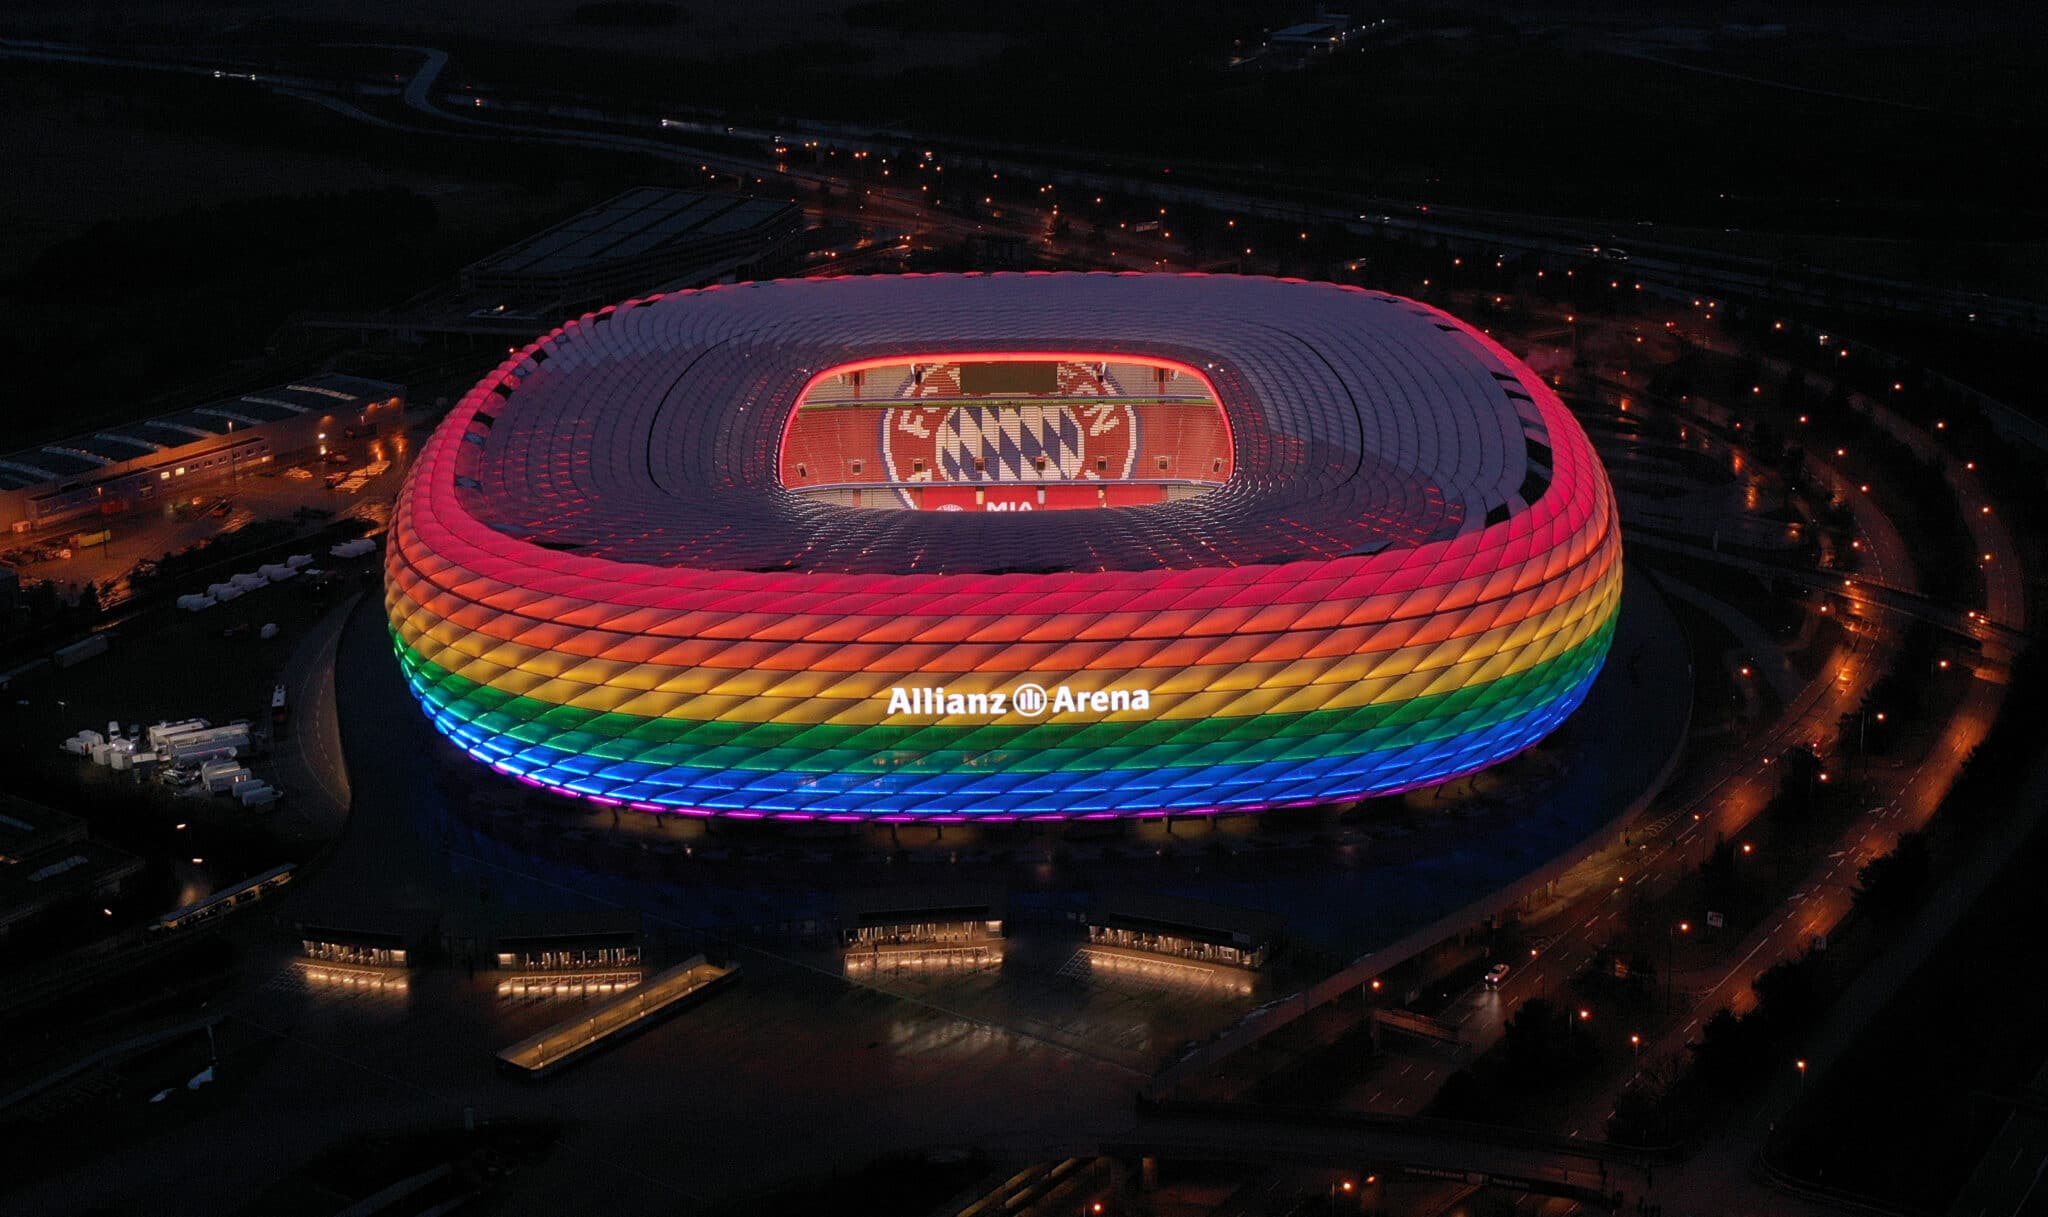 UEFA blocks Germany's Allianz Arena from lighting up in rainbows